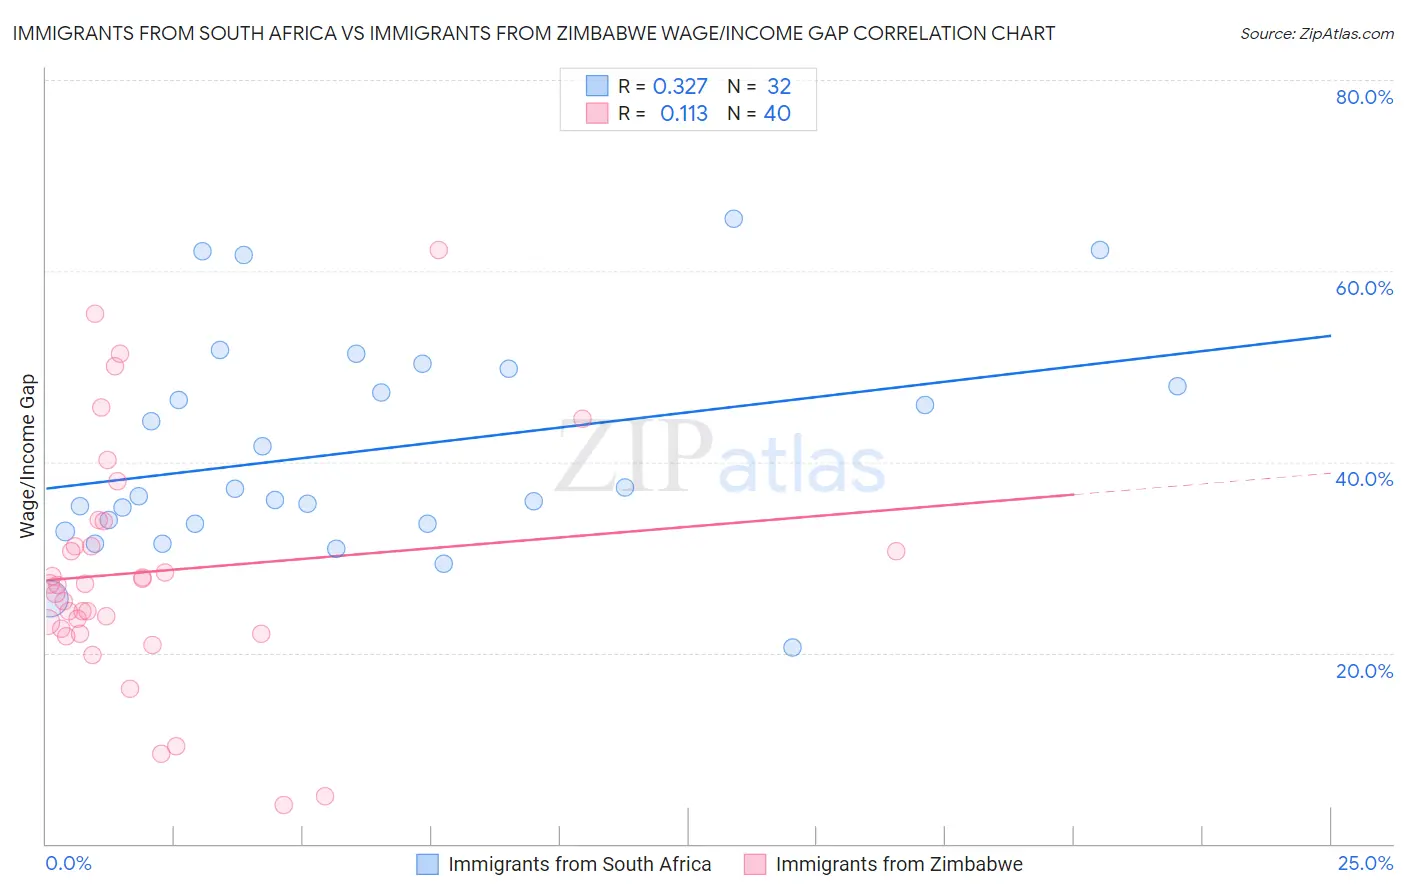 Immigrants from South Africa vs Immigrants from Zimbabwe Wage/Income Gap